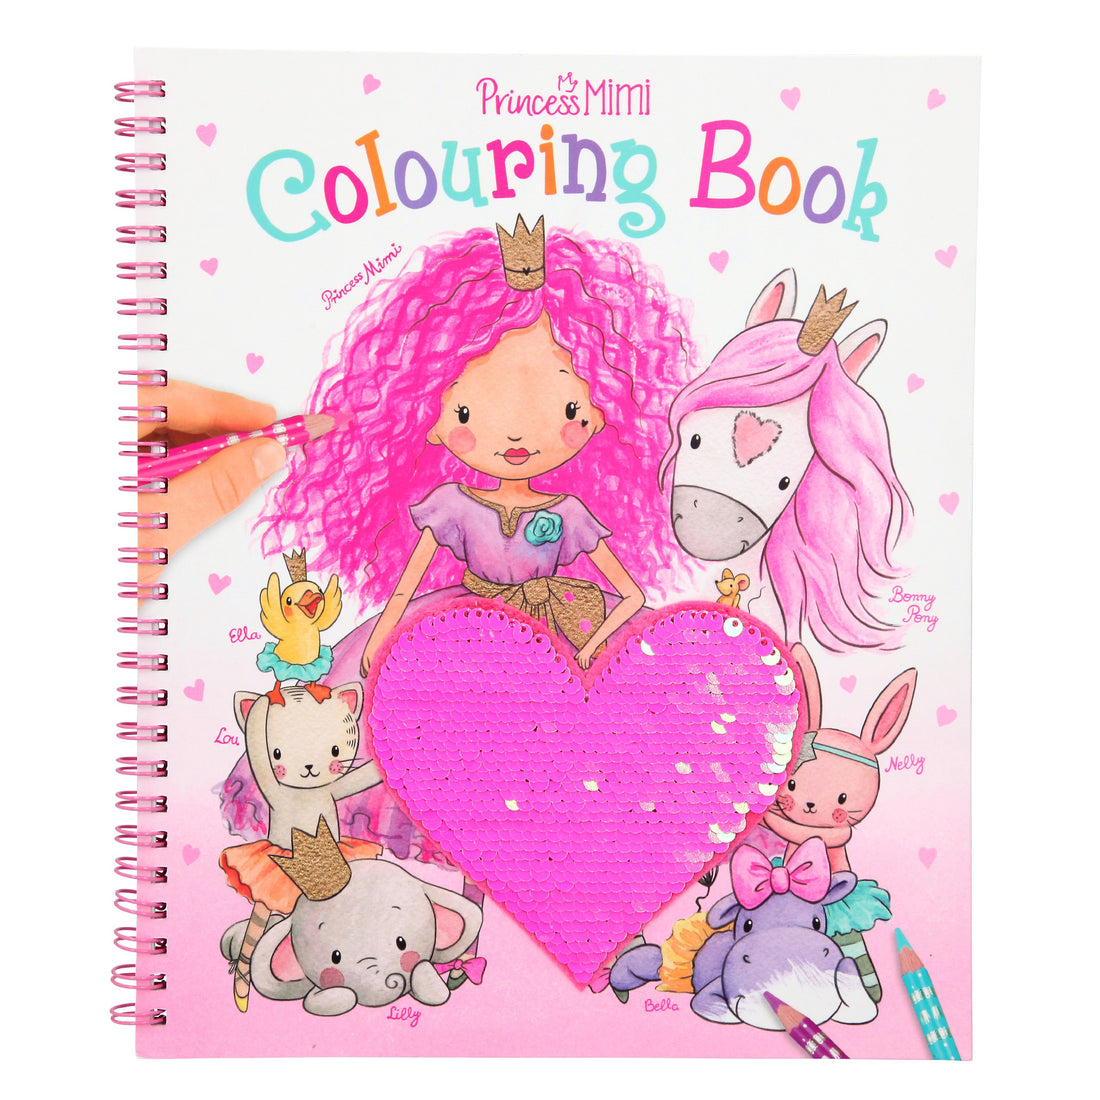 depesche-princess-mimi-colouring-book-with-sequins-pink-heart-animals- (6)